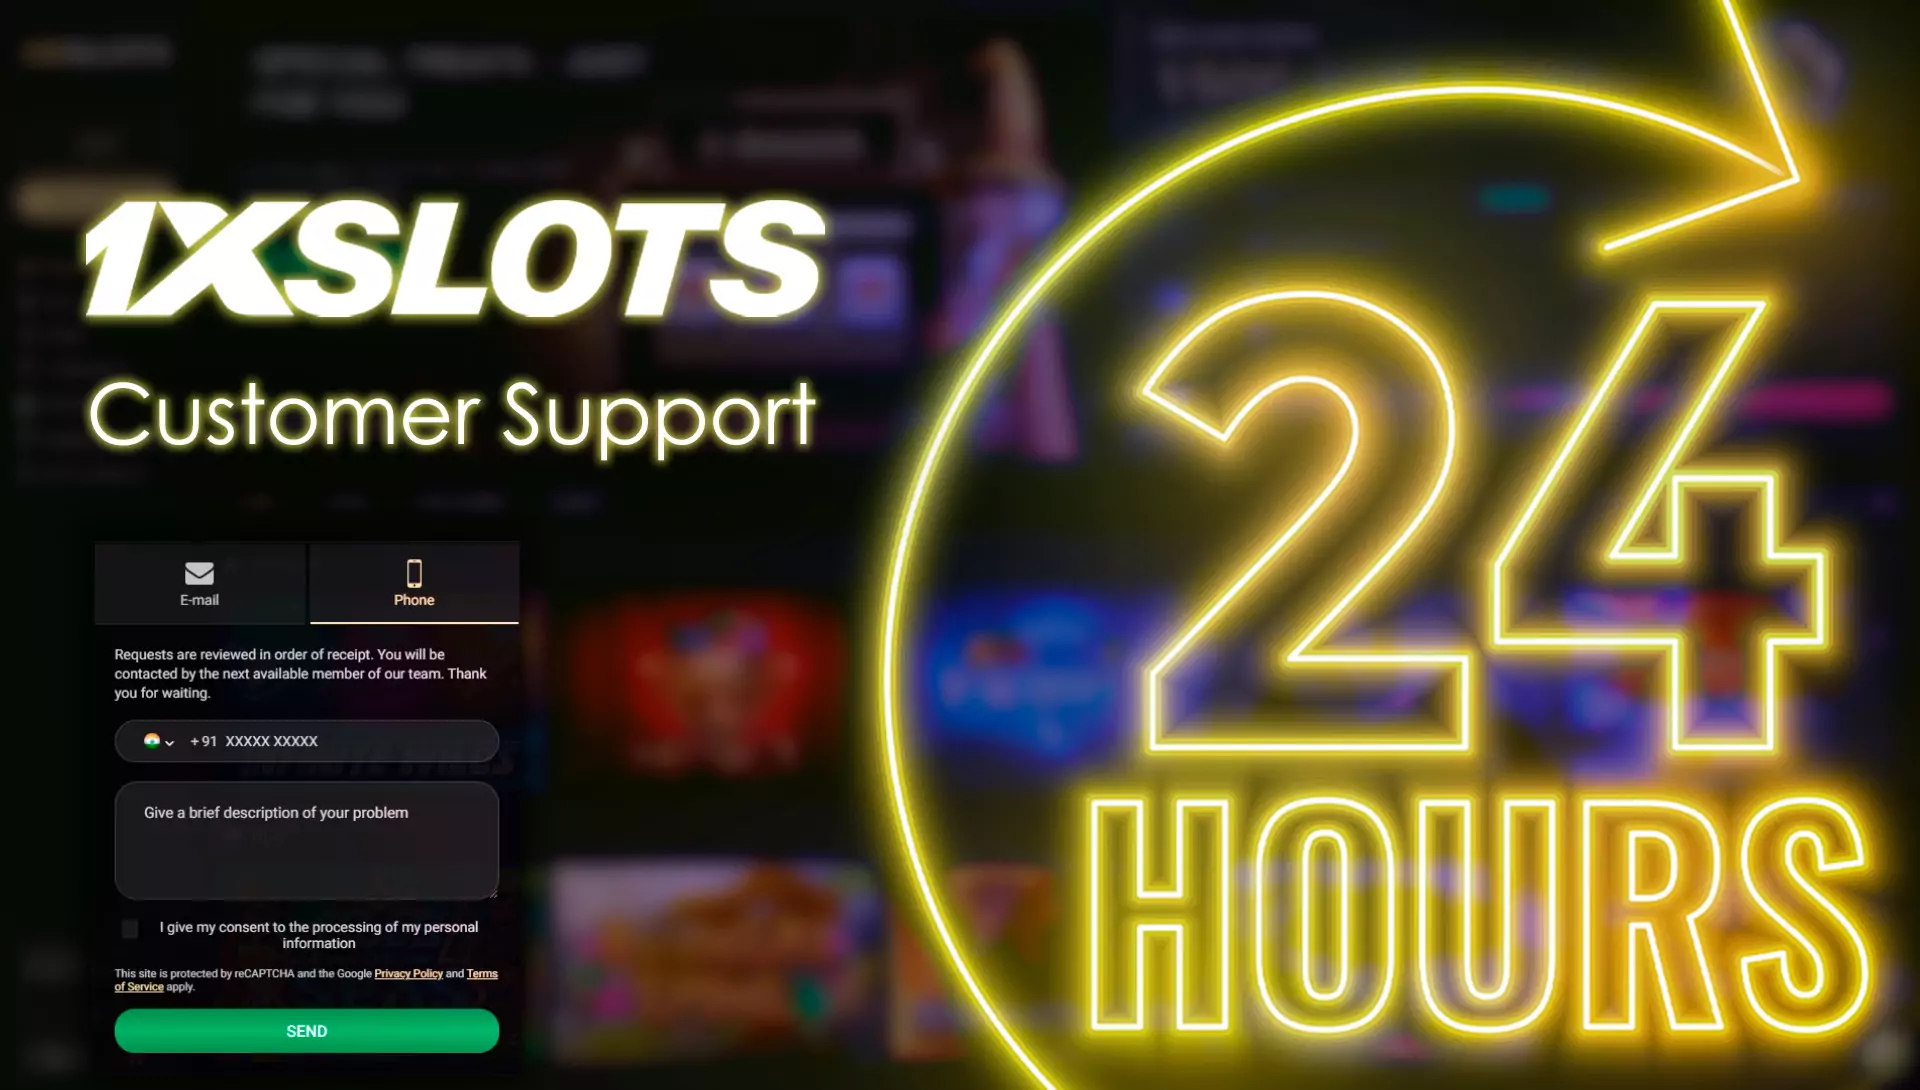 The customer support works 24/7 and always is ready to help you.